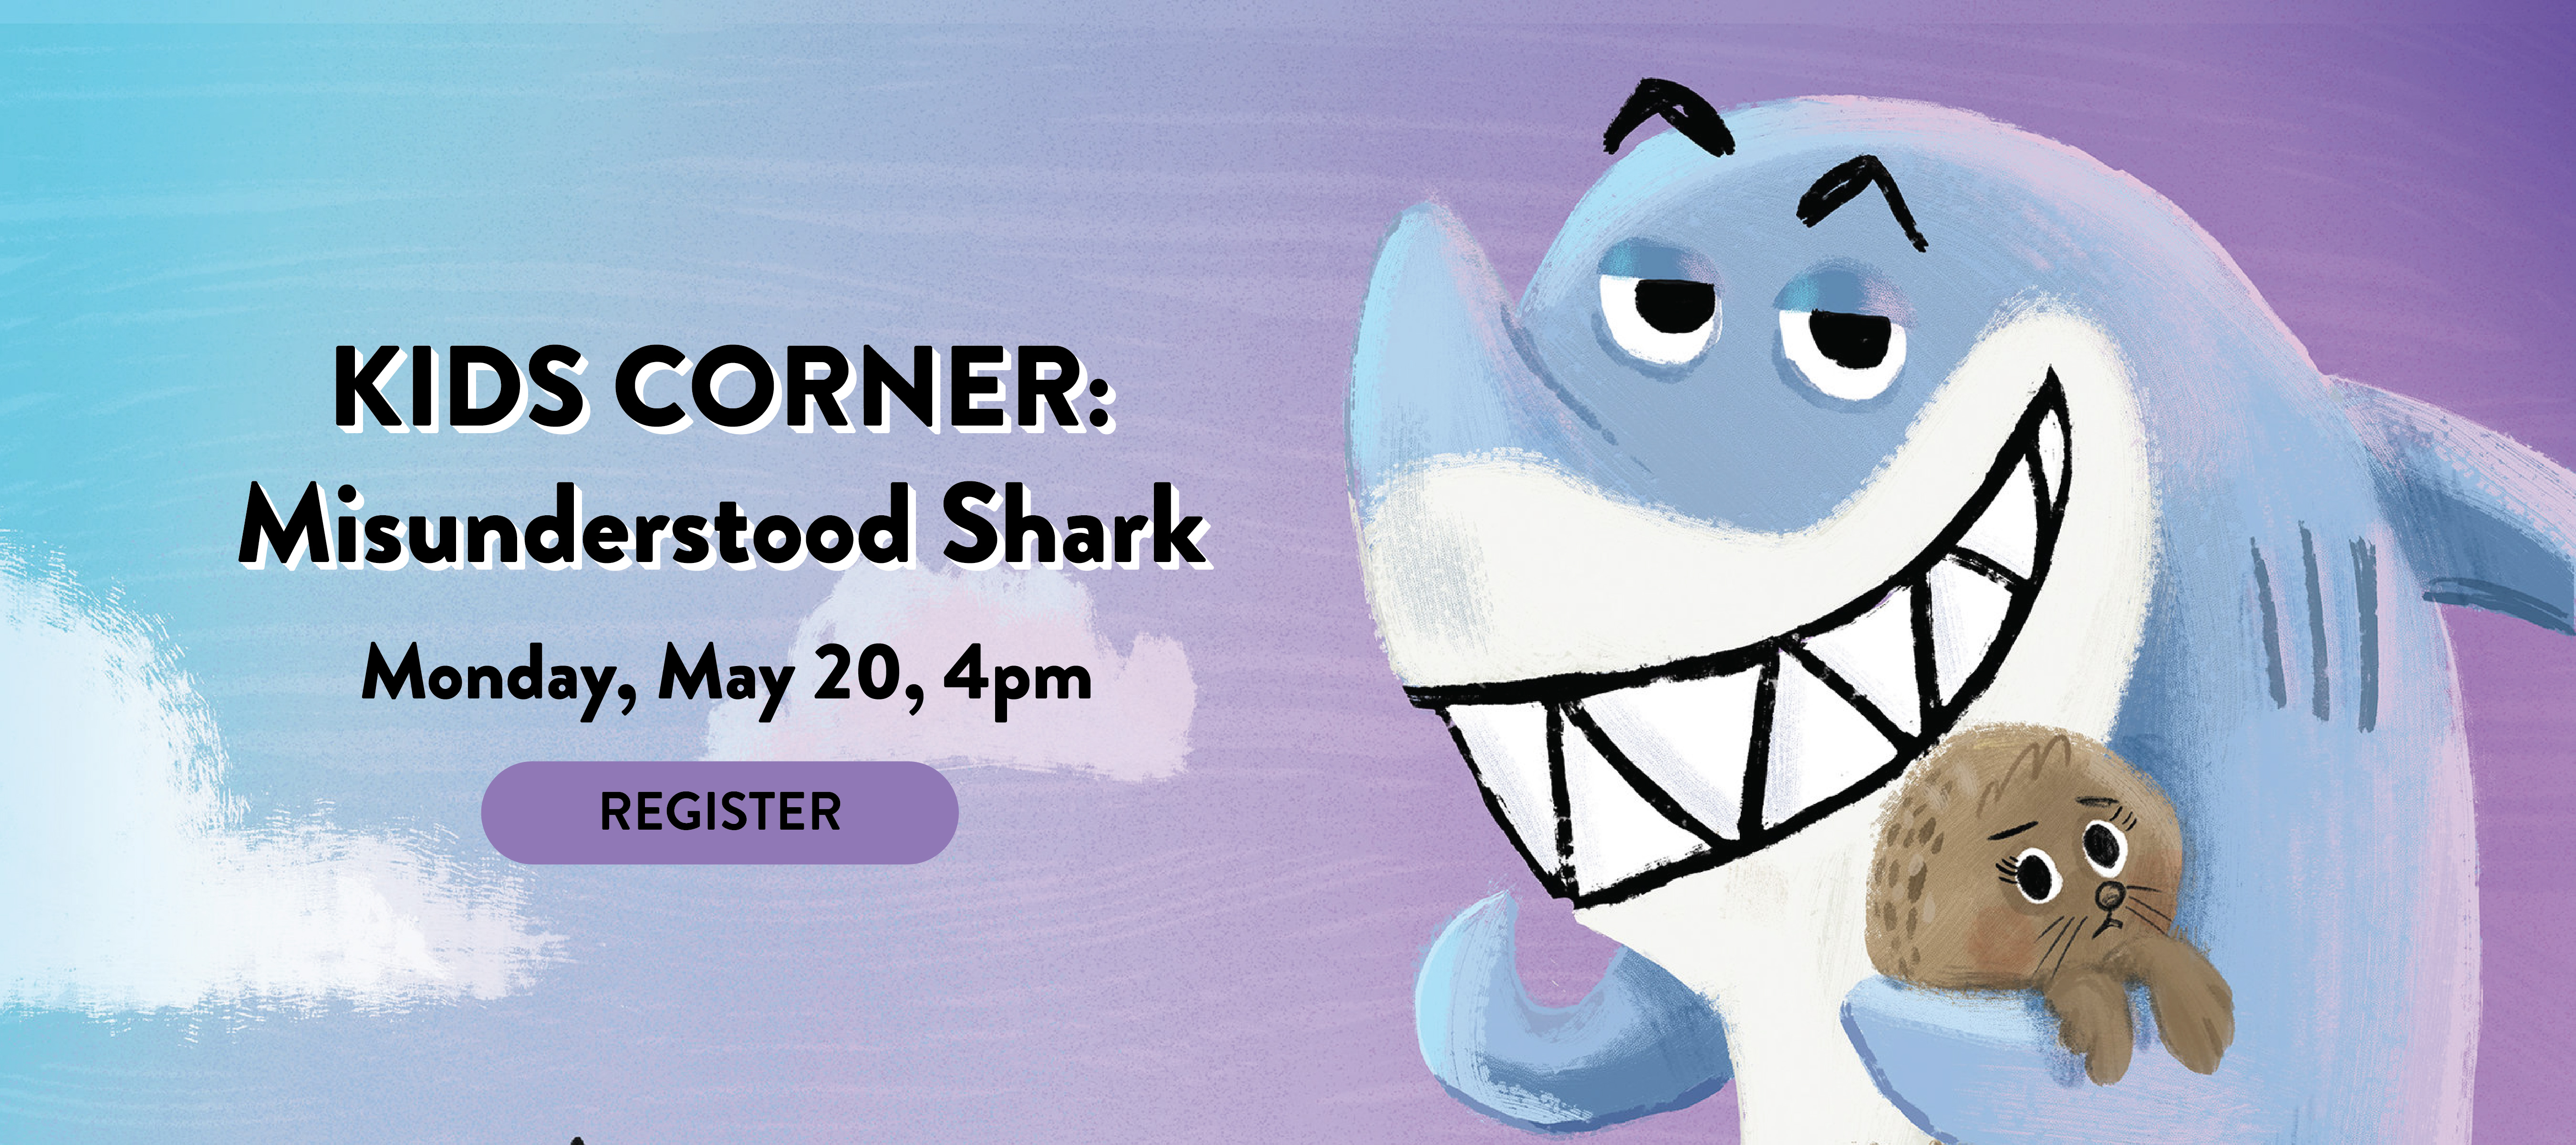 phpl, prospect heights public library, Kids Corner, Storytime, Book Club, Misunderstood Shark, sound effects, Youth